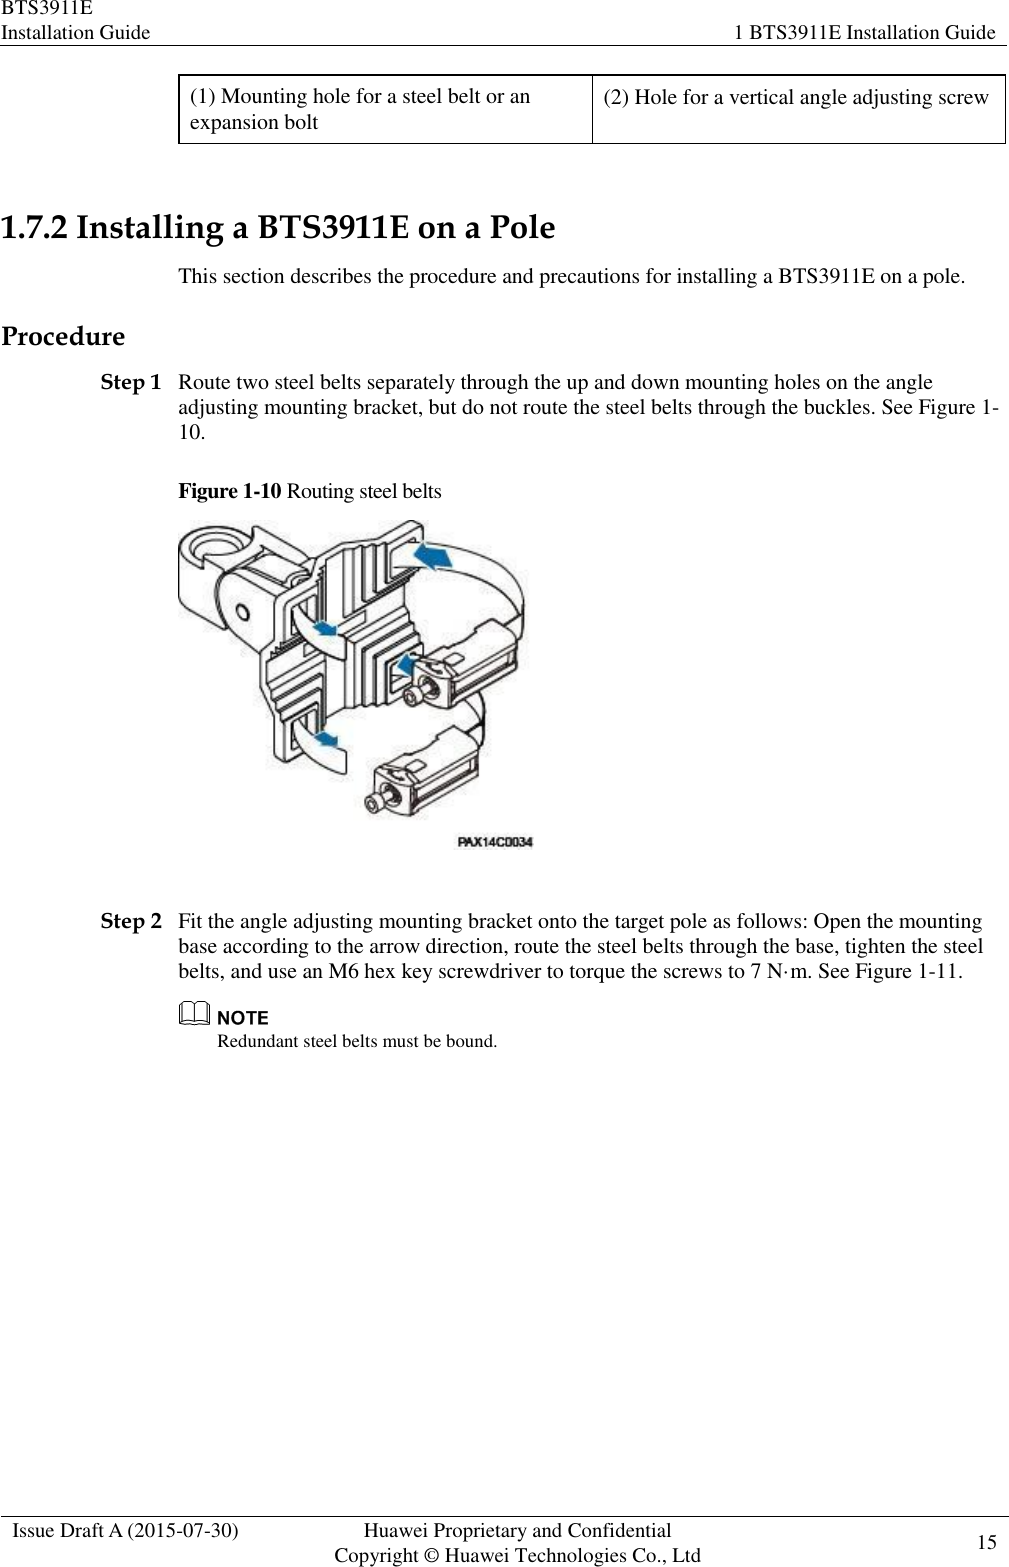 BTS3911E Installation Guide 1 BTS3911E Installation Guide  Issue Draft A (2015-07-30) Huawei Proprietary and Confidential           Copyright © Huawei Technologies Co., Ltd 15    (1) Mounting hole for a steel belt or an expansion bolt (2) Hole for a vertical angle adjusting screw  1.7.2 Installing a BTS3911E on a Pole This section describes the procedure and precautions for installing a BTS3911E on a pole. Procedure Step 1 Route two steel belts separately through the up and down mounting holes on the angle adjusting mounting bracket, but do not route the steel belts through the buckles. See Figure 1-10. Figure 1-10 Routing steel belts   Step 2 Fit the angle adjusting mounting bracket onto the target pole as follows: Open the mounting base according to the arrow direction, route the steel belts through the base, tighten the steel belts, and use an M6 hex key screwdriver to torque the screws to 7 N·m. See Figure 1-11.  Redundant steel belts must be bound. 